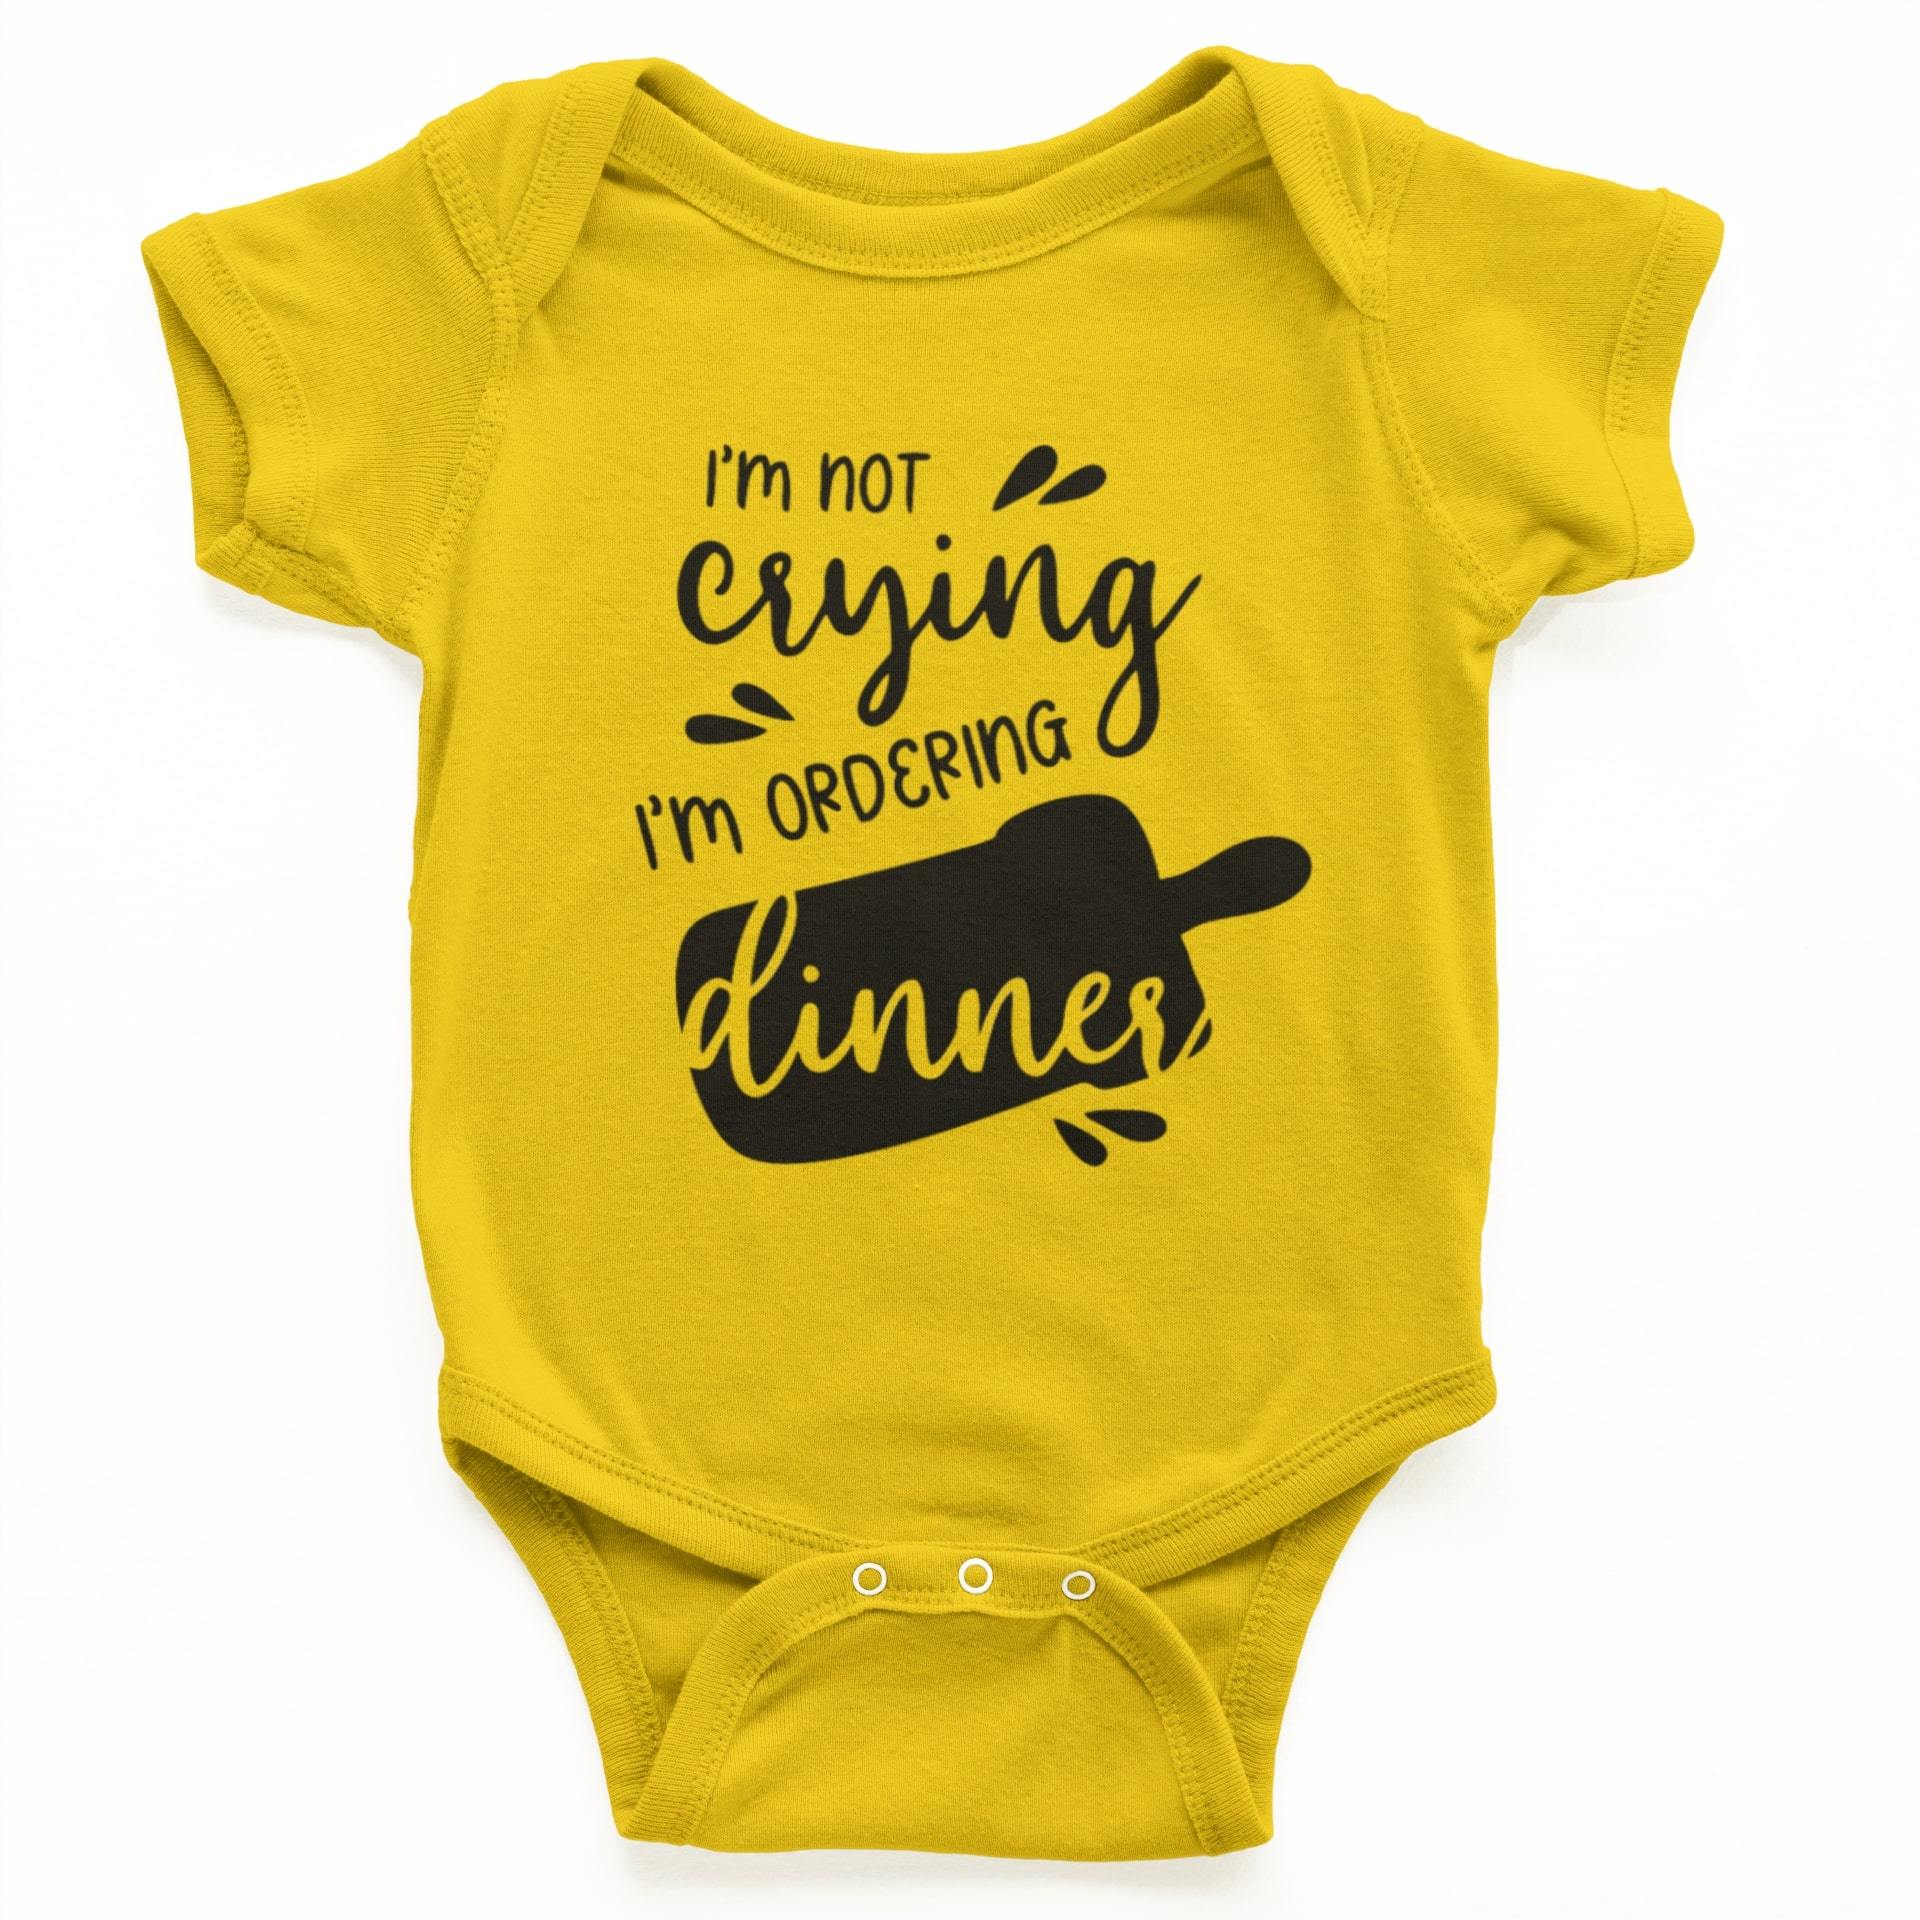 thelegalgang,I am not crying Rompers for Babies,.